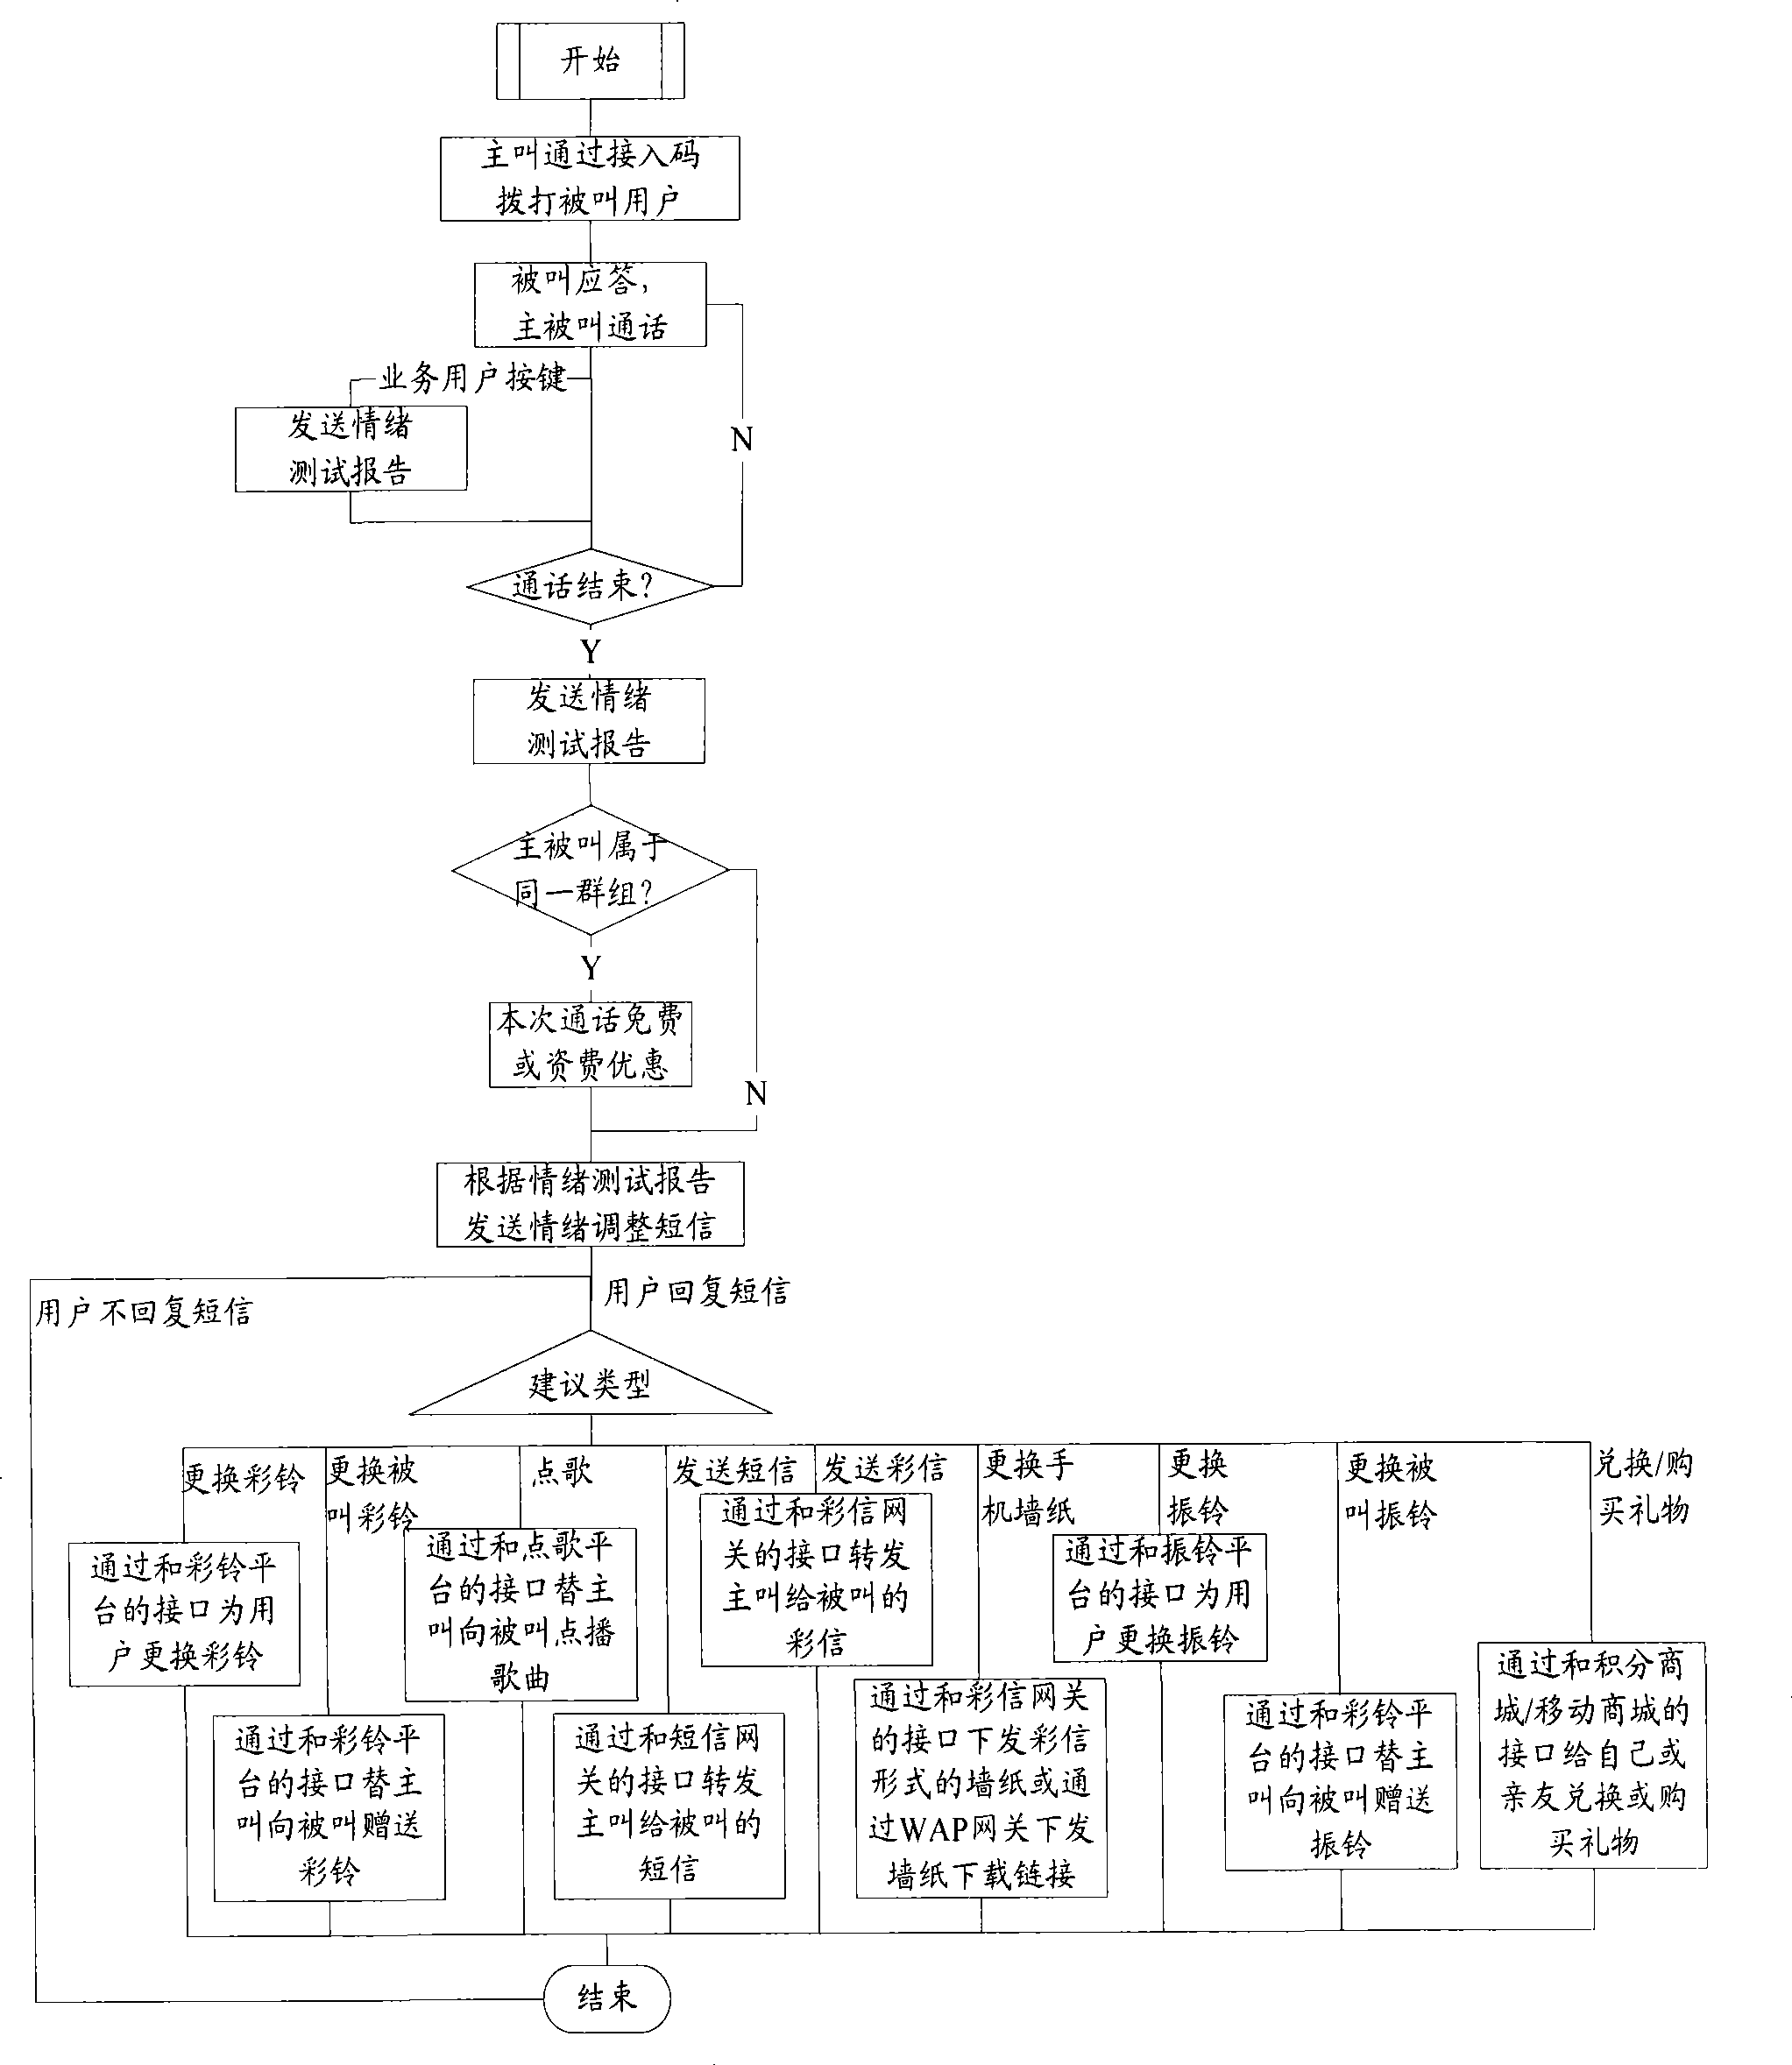 System and method for implementing emotion detection and service guidance based on emotion detection technique